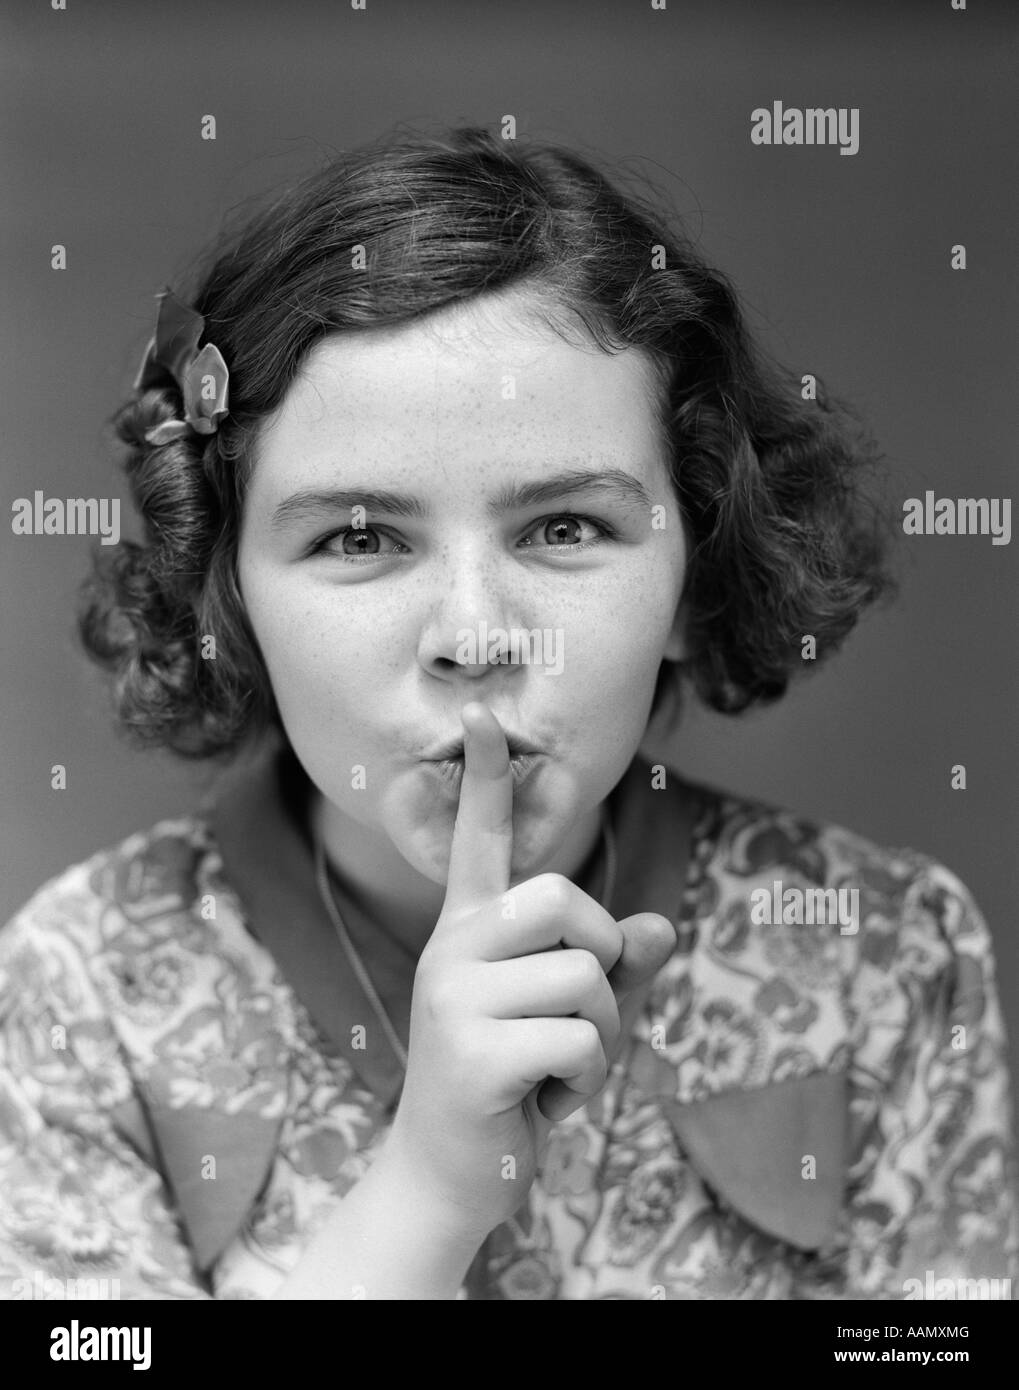 1930s PORTRAIT OF YOUNG GIRL WITH FINGER TO MOUTH MAKING SHUSH BE QUIET EXPRESSION Stock Photo